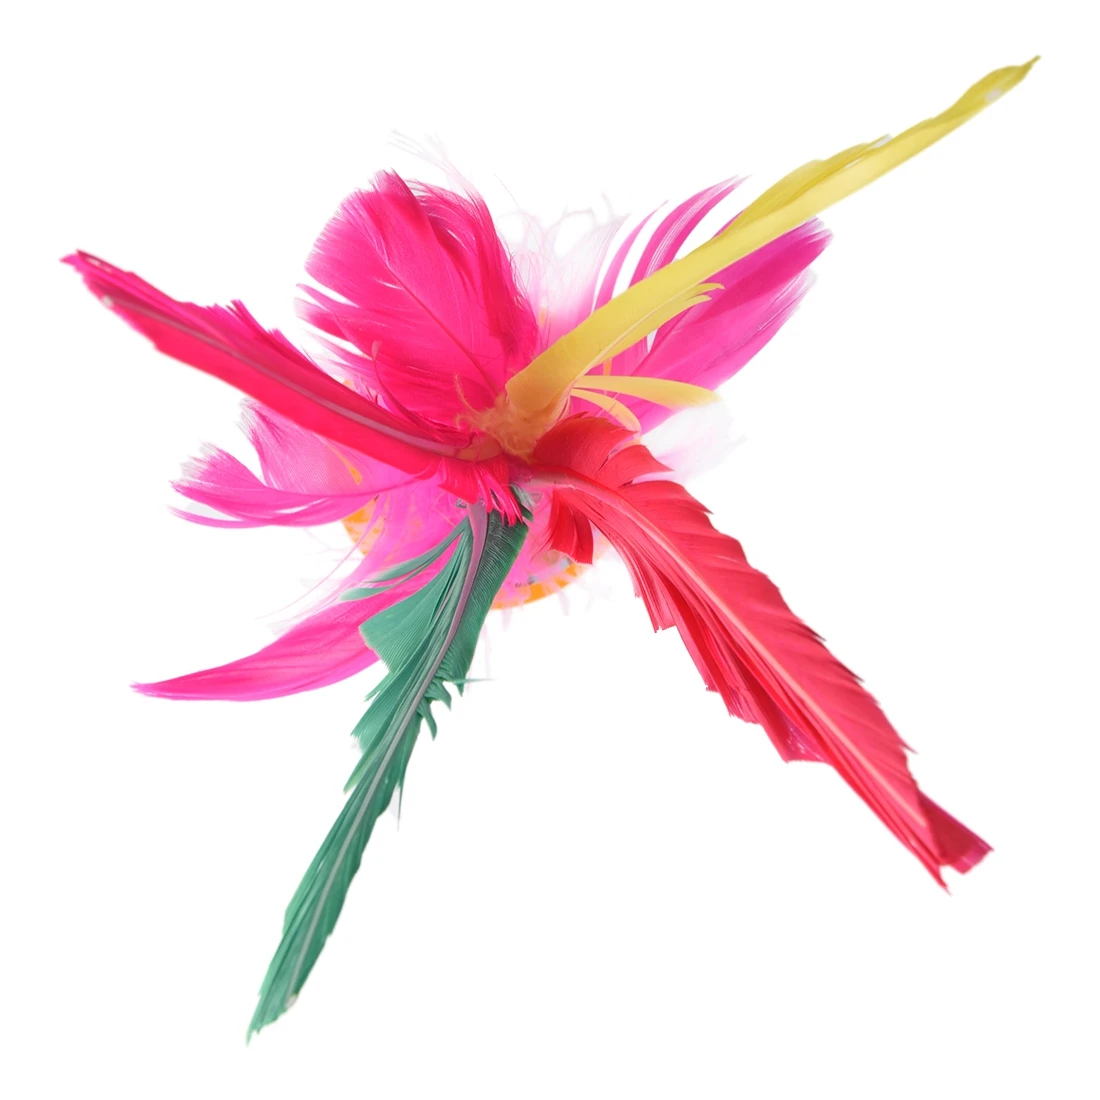 New Outdoor Sports 4 Colors Feather Chinese Jianzi Game Shuttlecock 8.3 High N3 